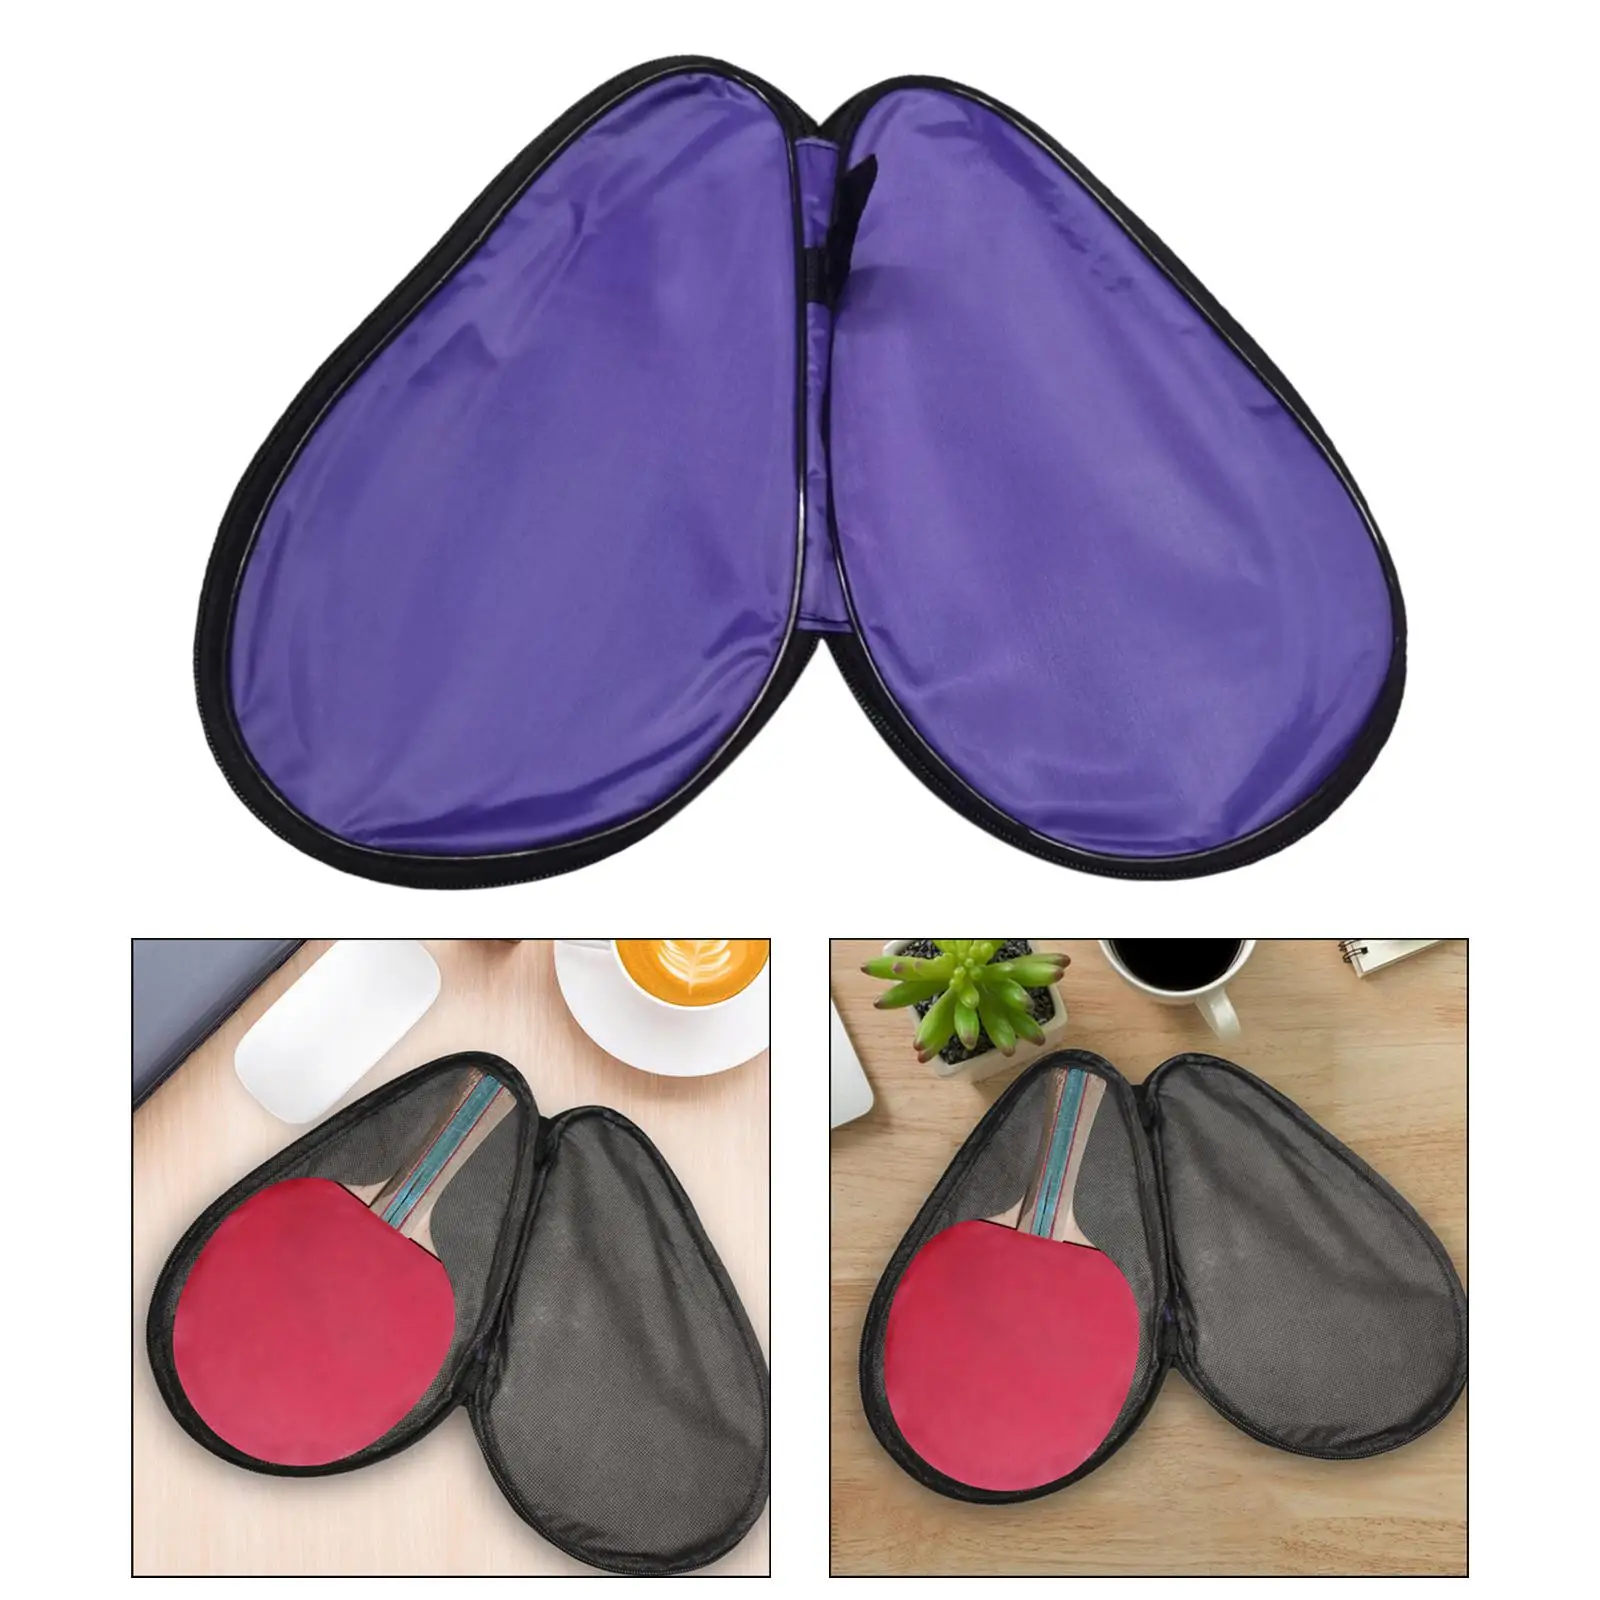 Ping Pong Case PVC Lightweight Rainproof Protective Zipper Closure Table Tennis Racket Bag for Adult Training Gym Athlete